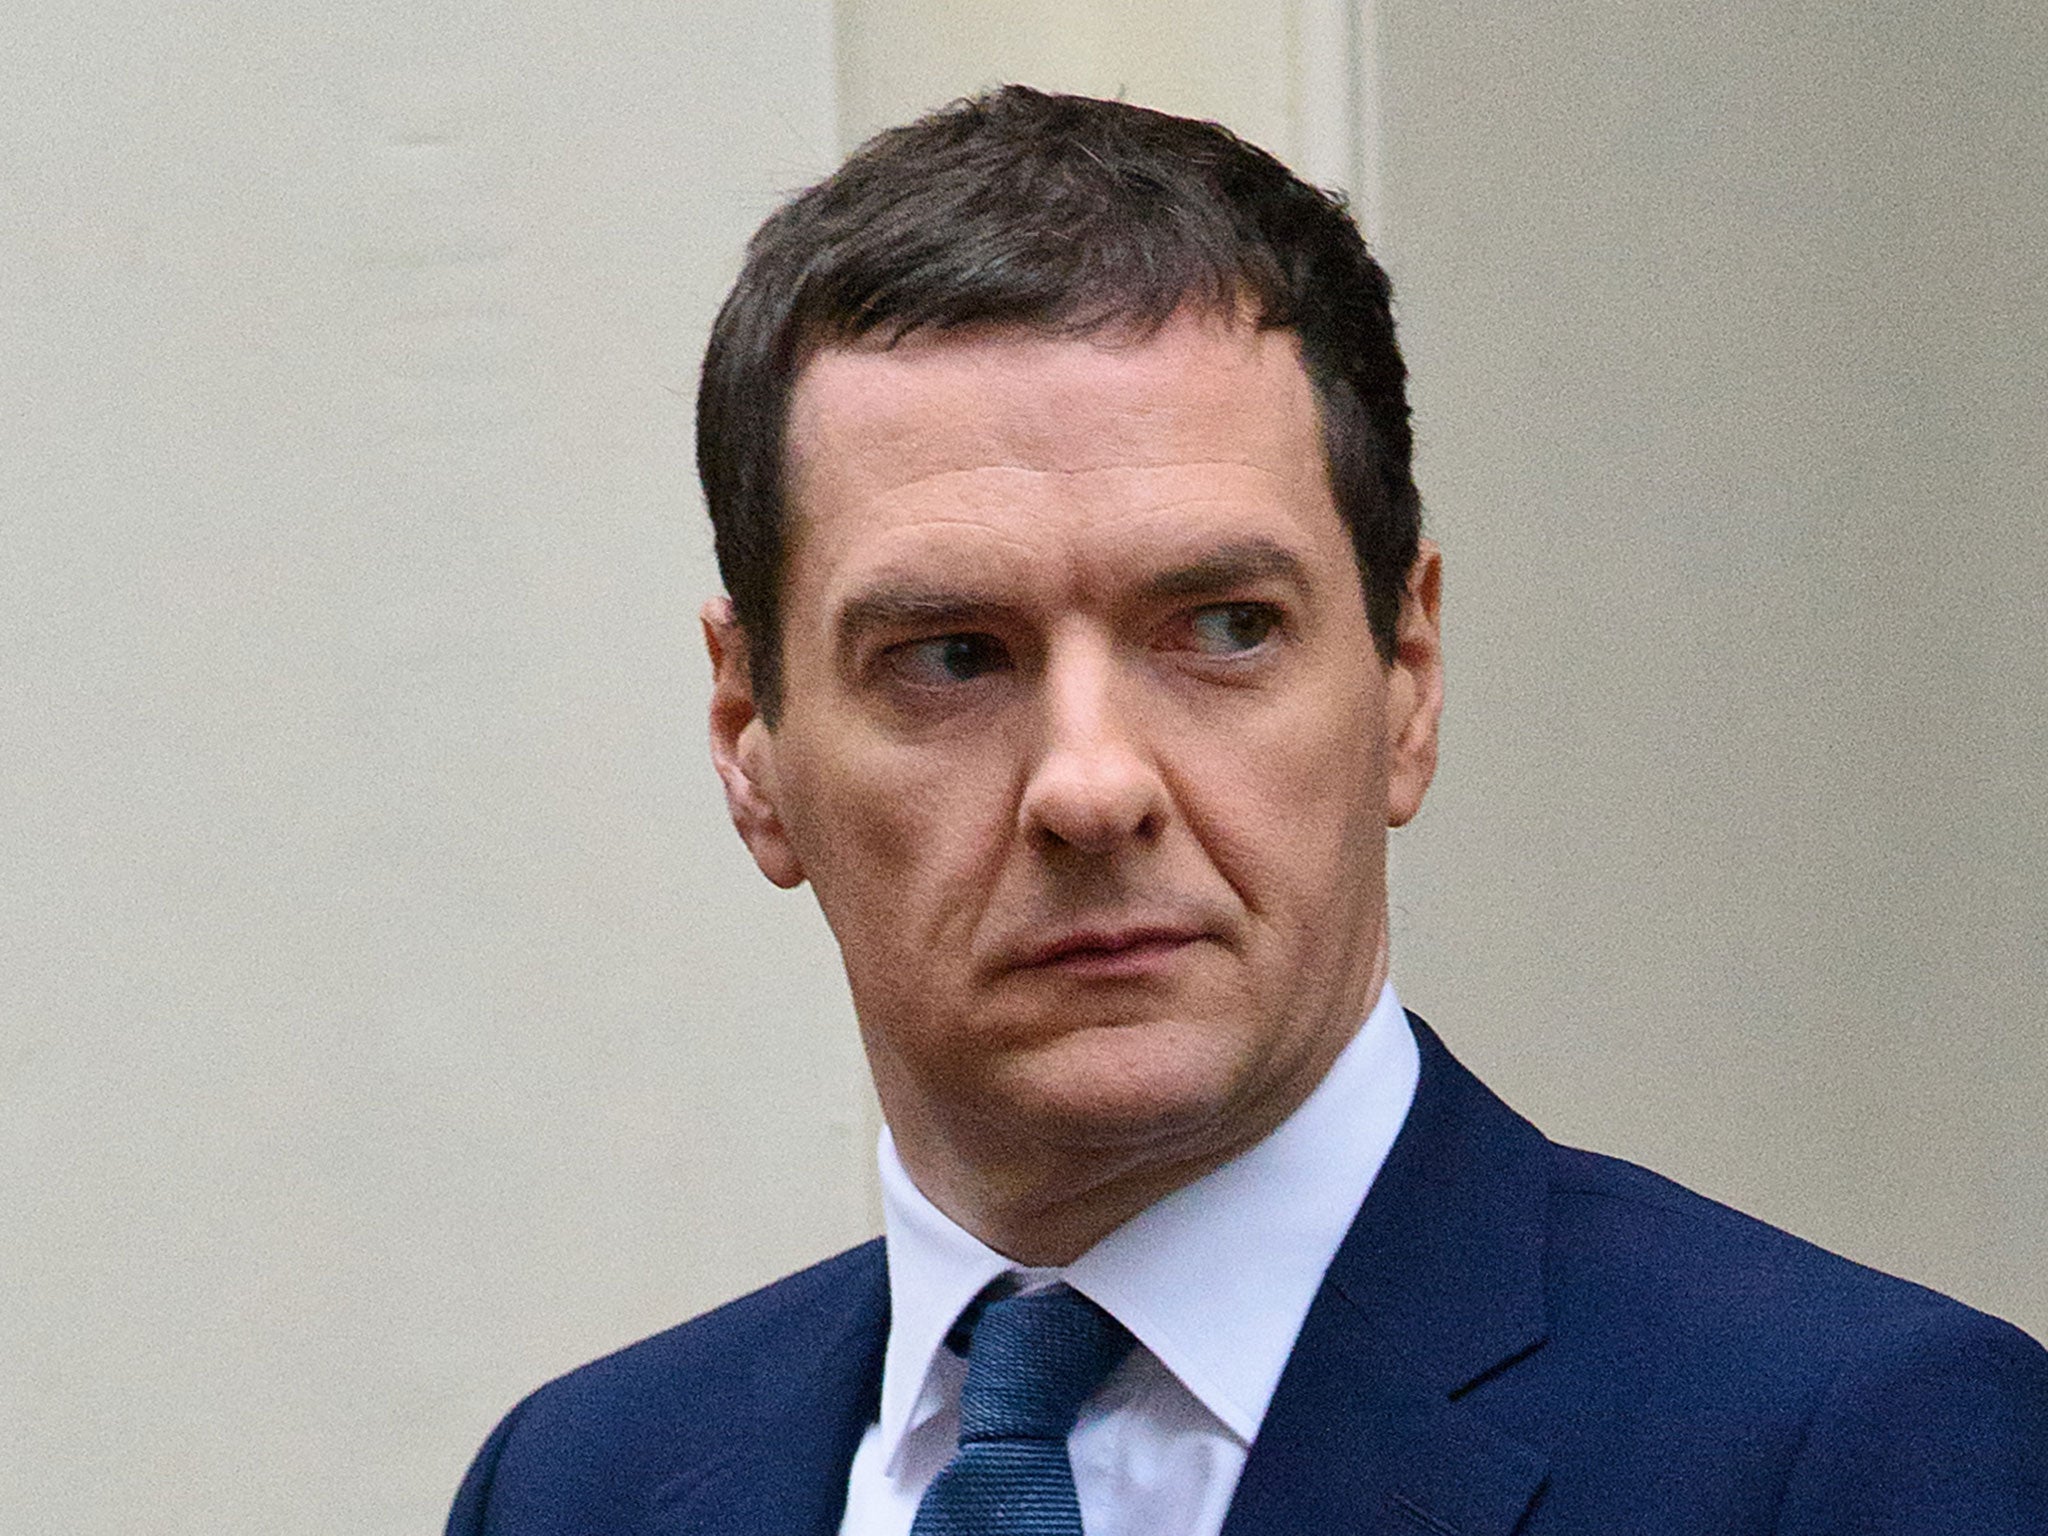 In a speech on the same day as the survey, Osborne said the Uk faces a "dangerous cocktail" of economic risks and that 2016 would be the "year of mission critical"